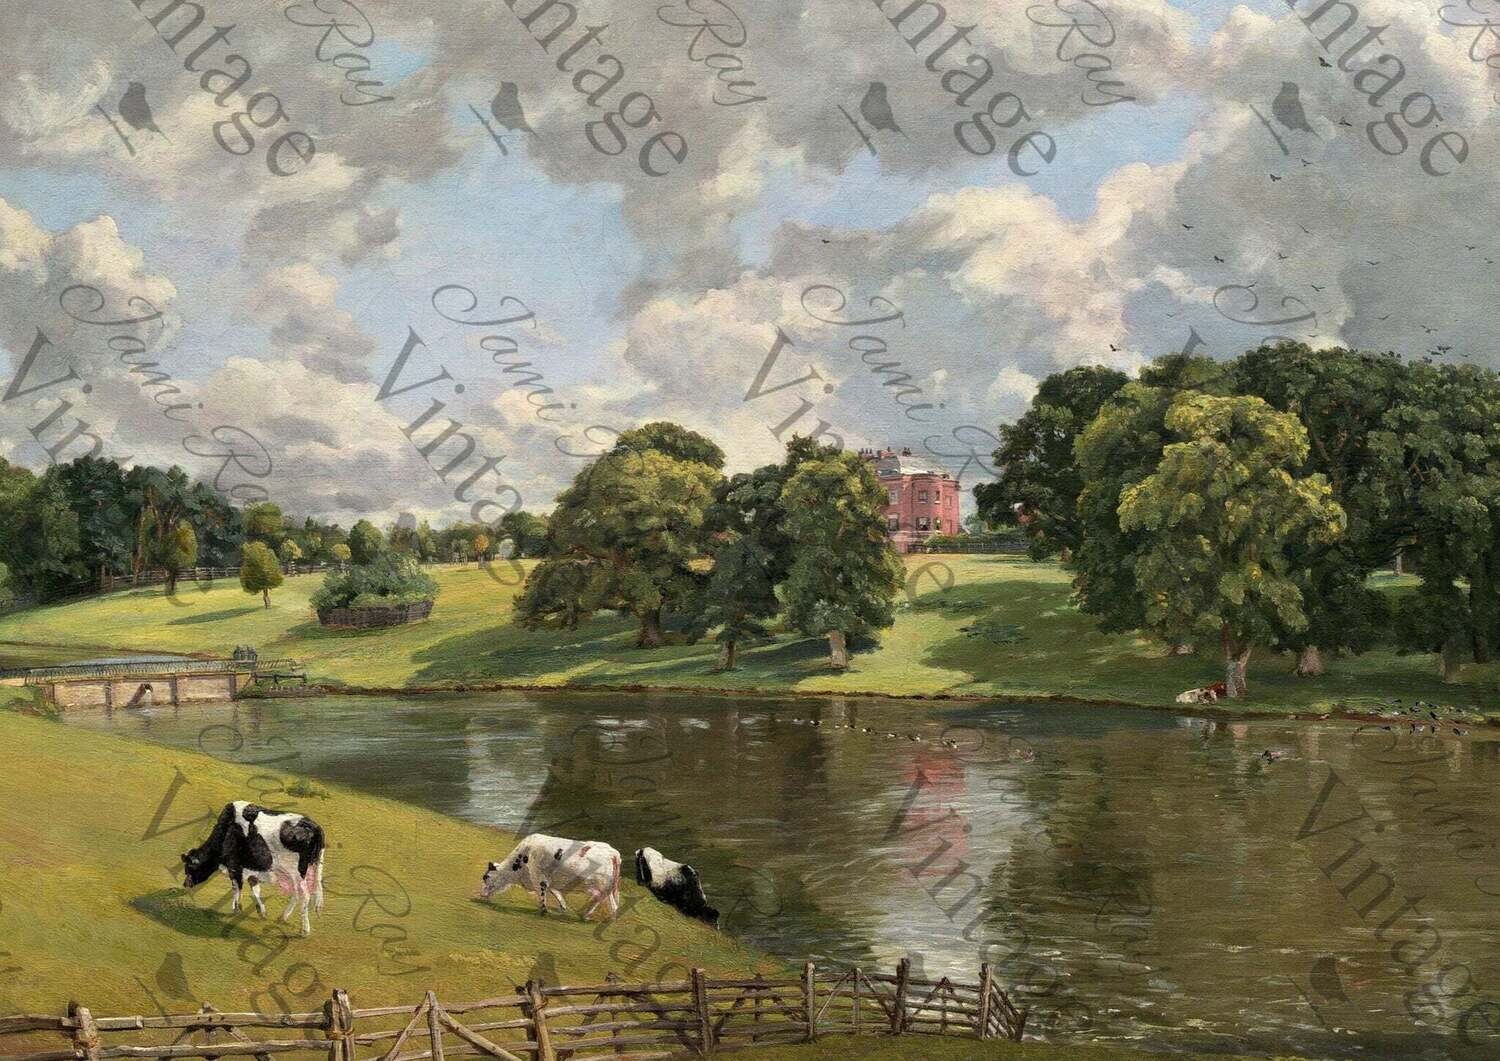 Cows By A River A4 Rice Paper by JRV